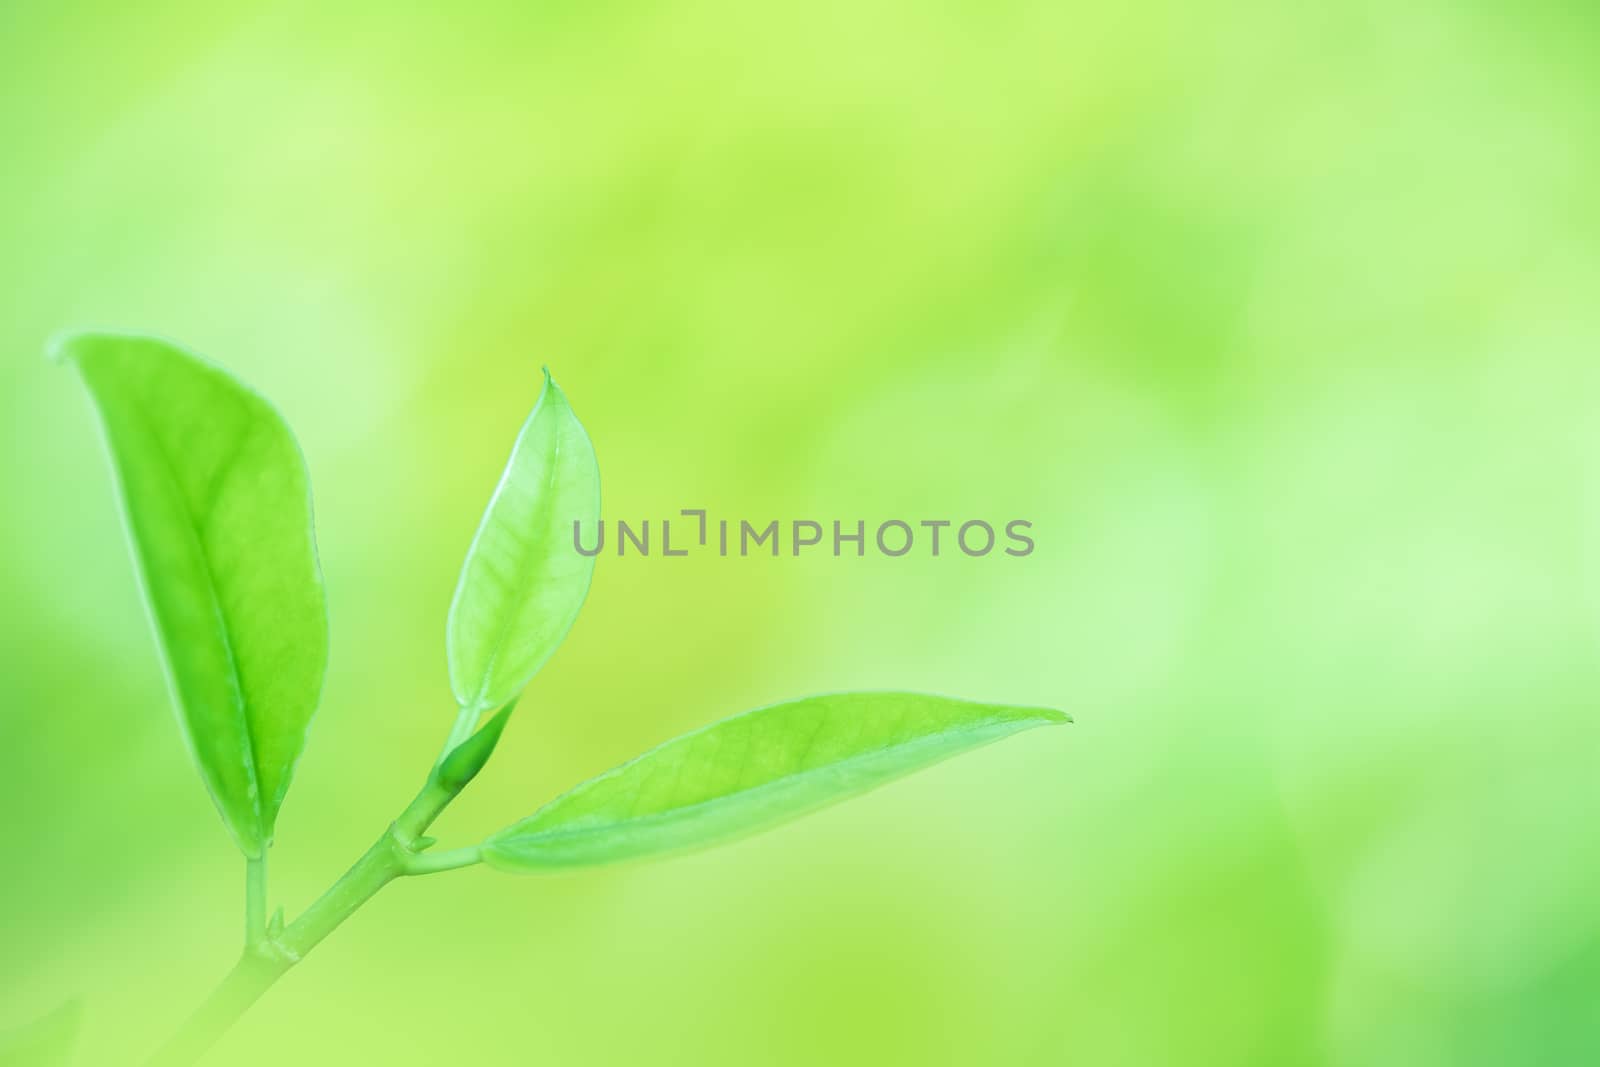 Leaves close up nature view of green leaf on blurred greenery ba by photosam